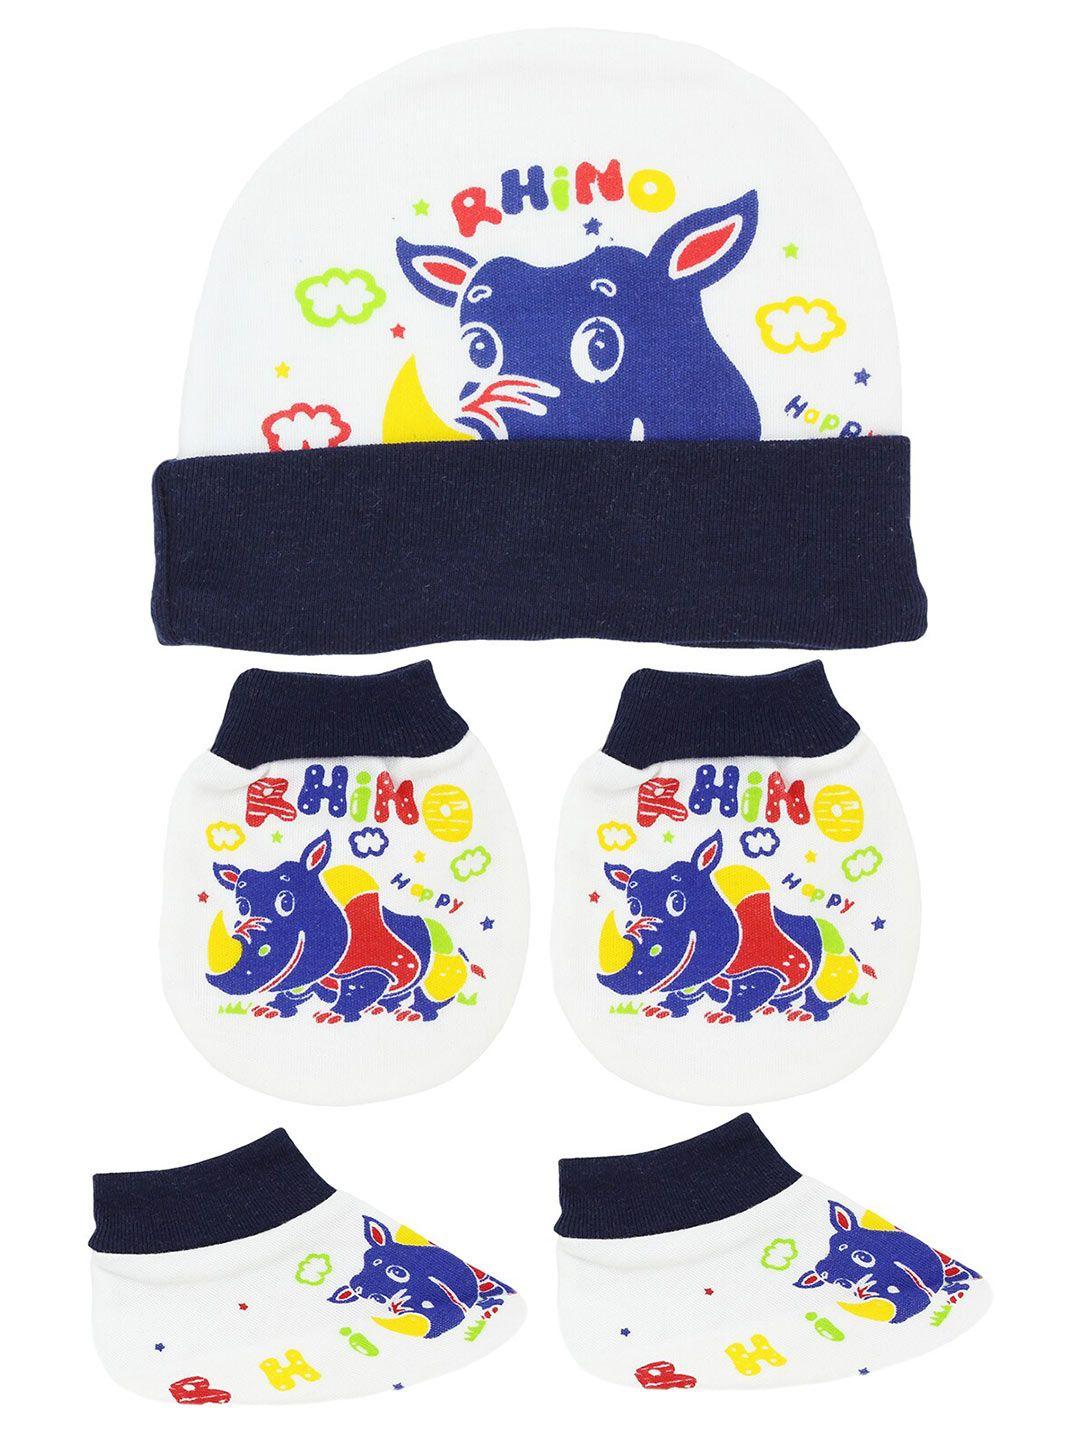 baesd infants graphic printed organic cotton mittens with booties & cap